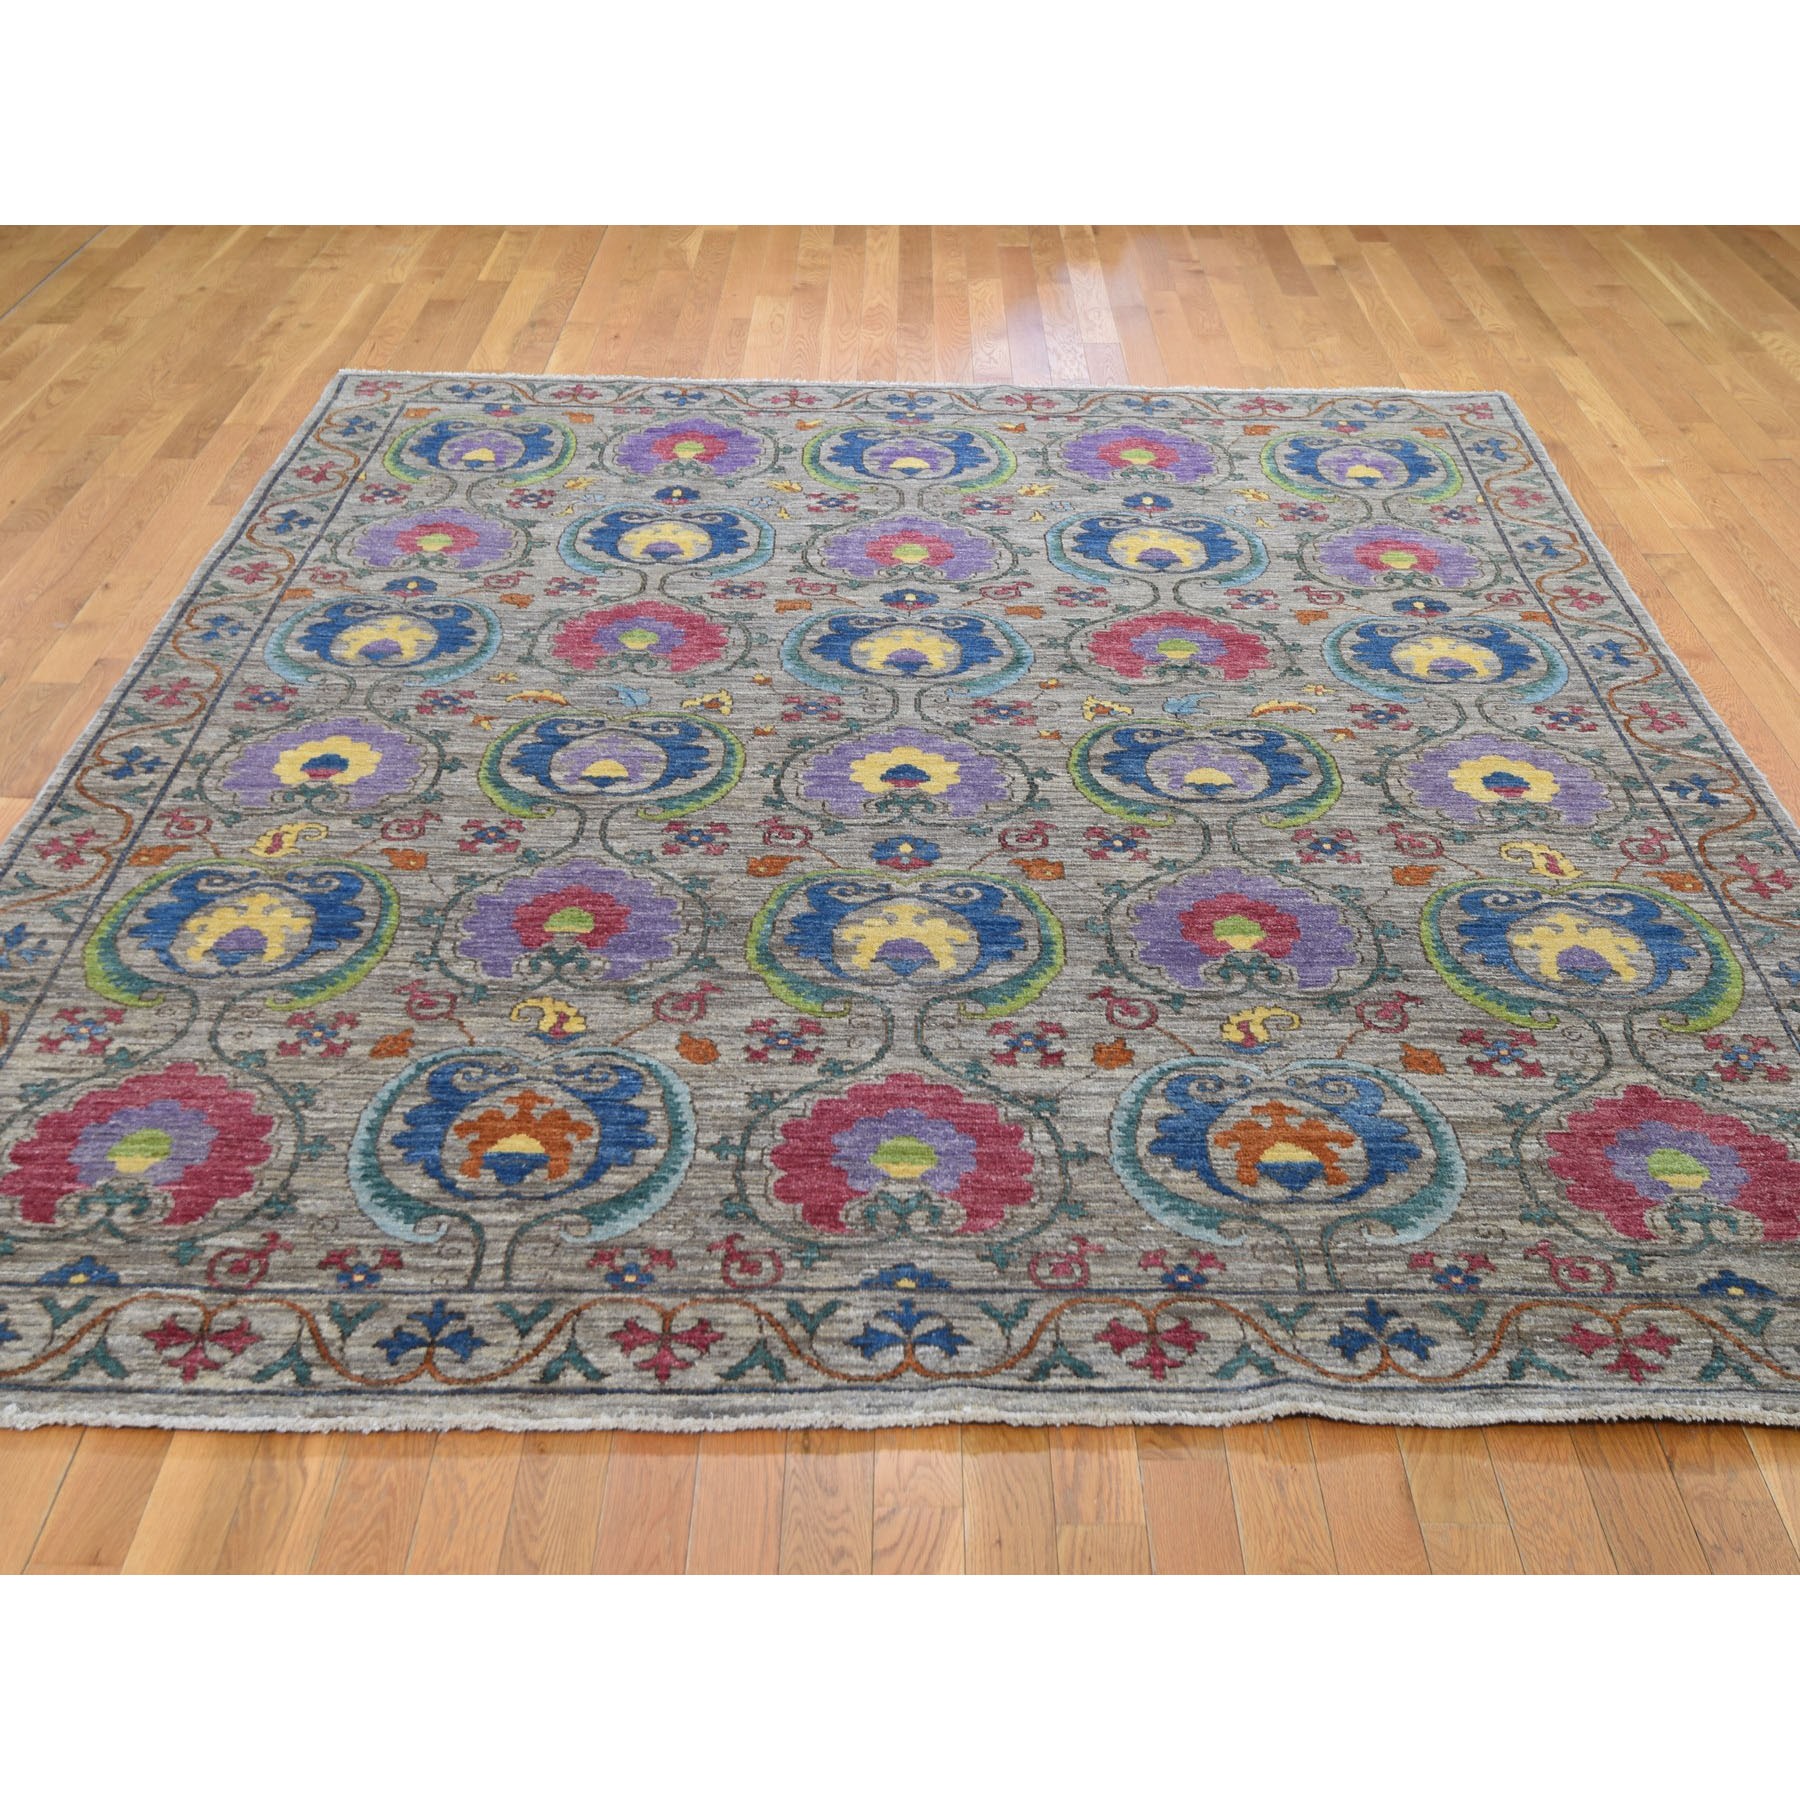 8-1 x10- Colorful Hand Knotted Peshawar Arts and Crafts Design Oriental Rug 